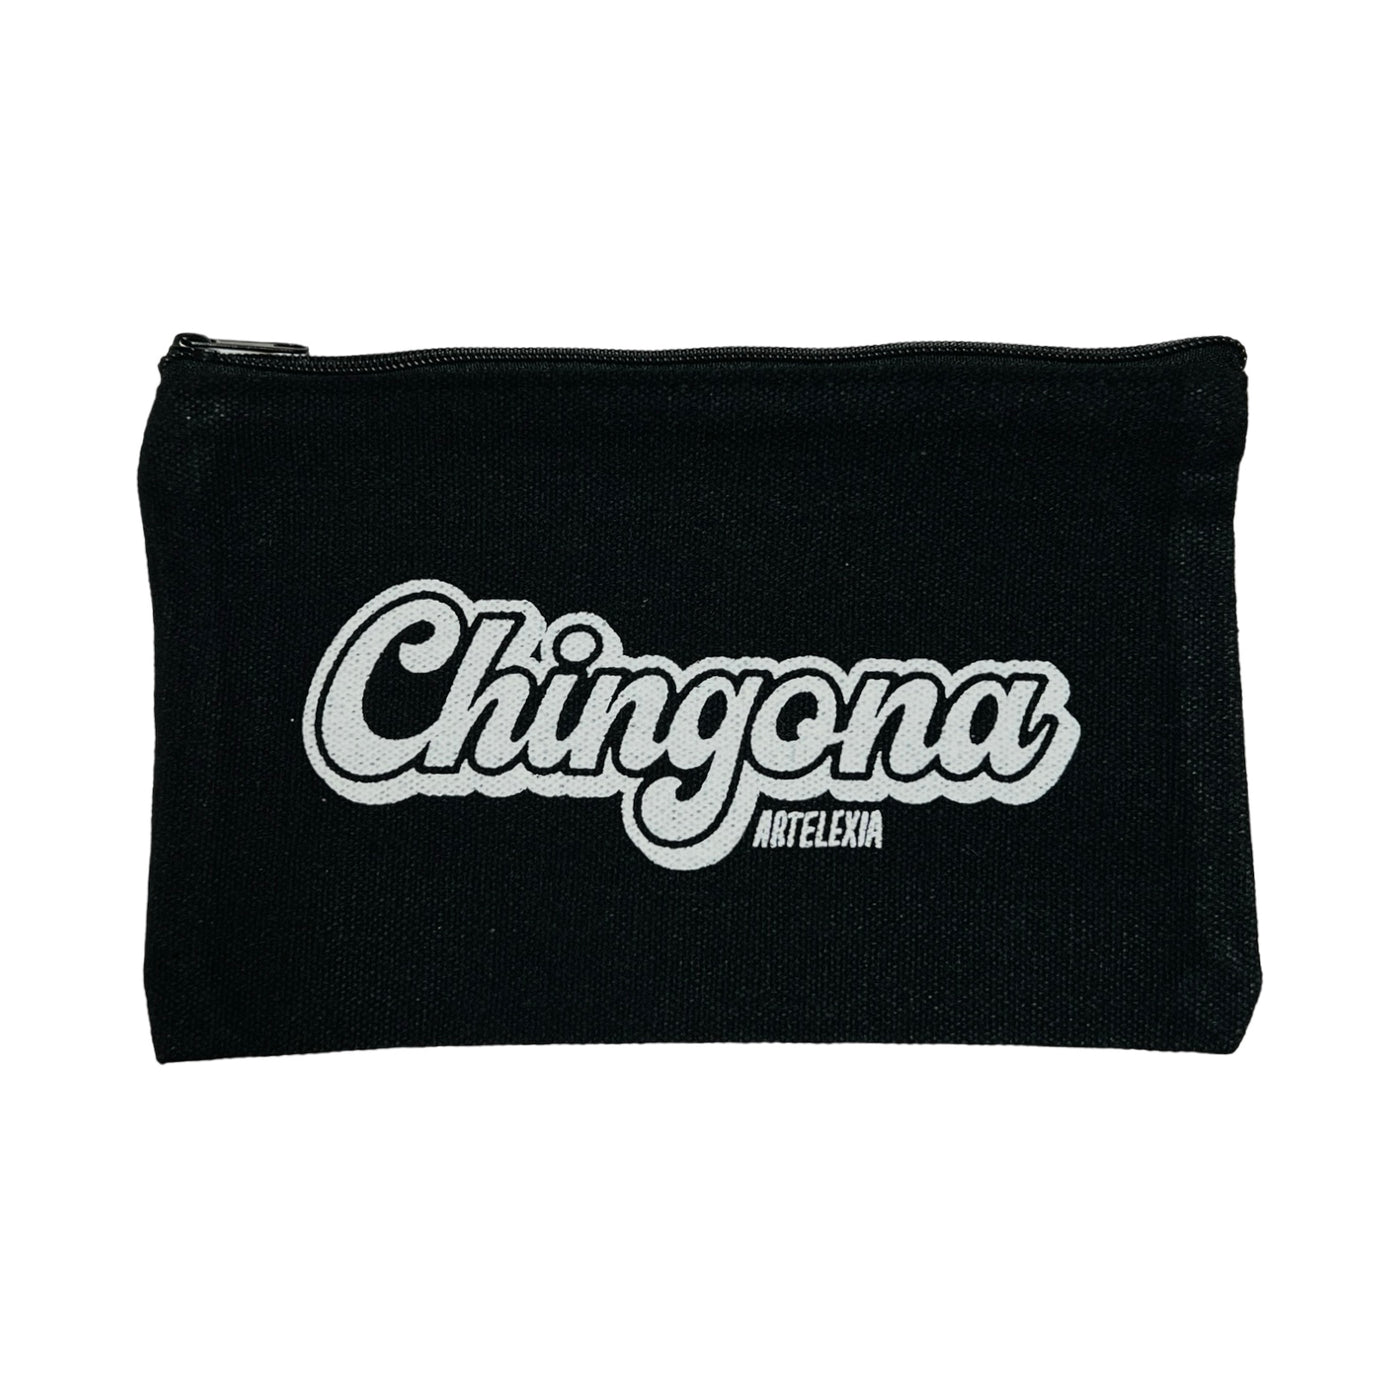 black canvas zipper pouch with the word Chingona in white lettering.